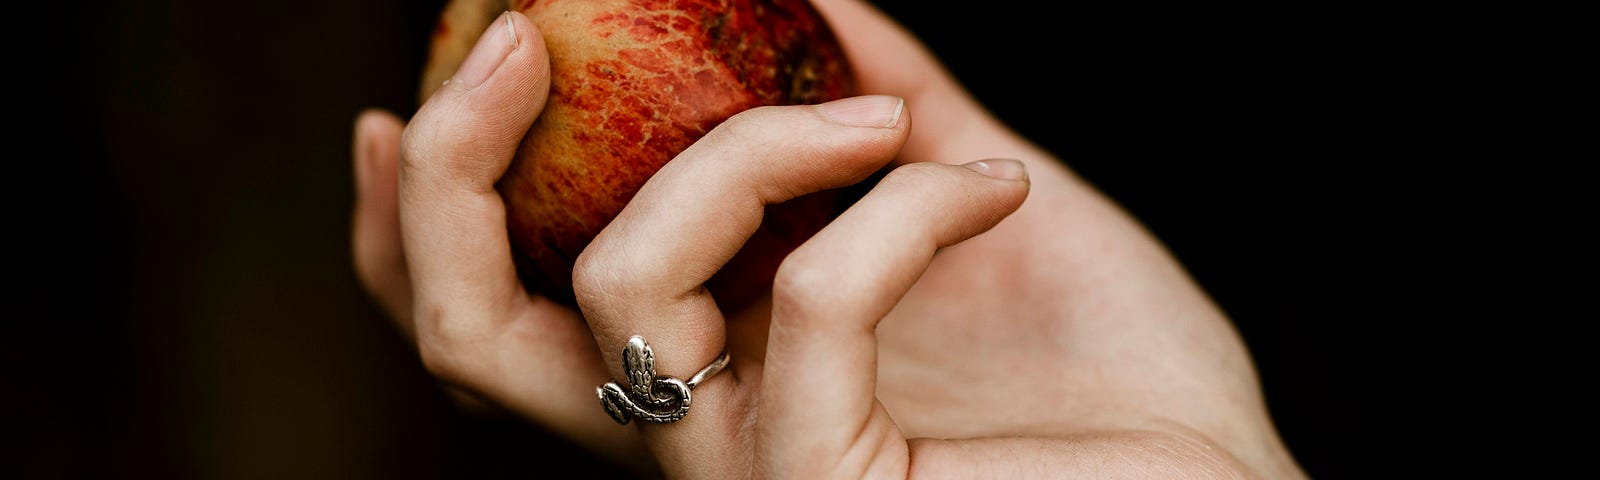 Woman holding a red apple with a snake ring on her finger